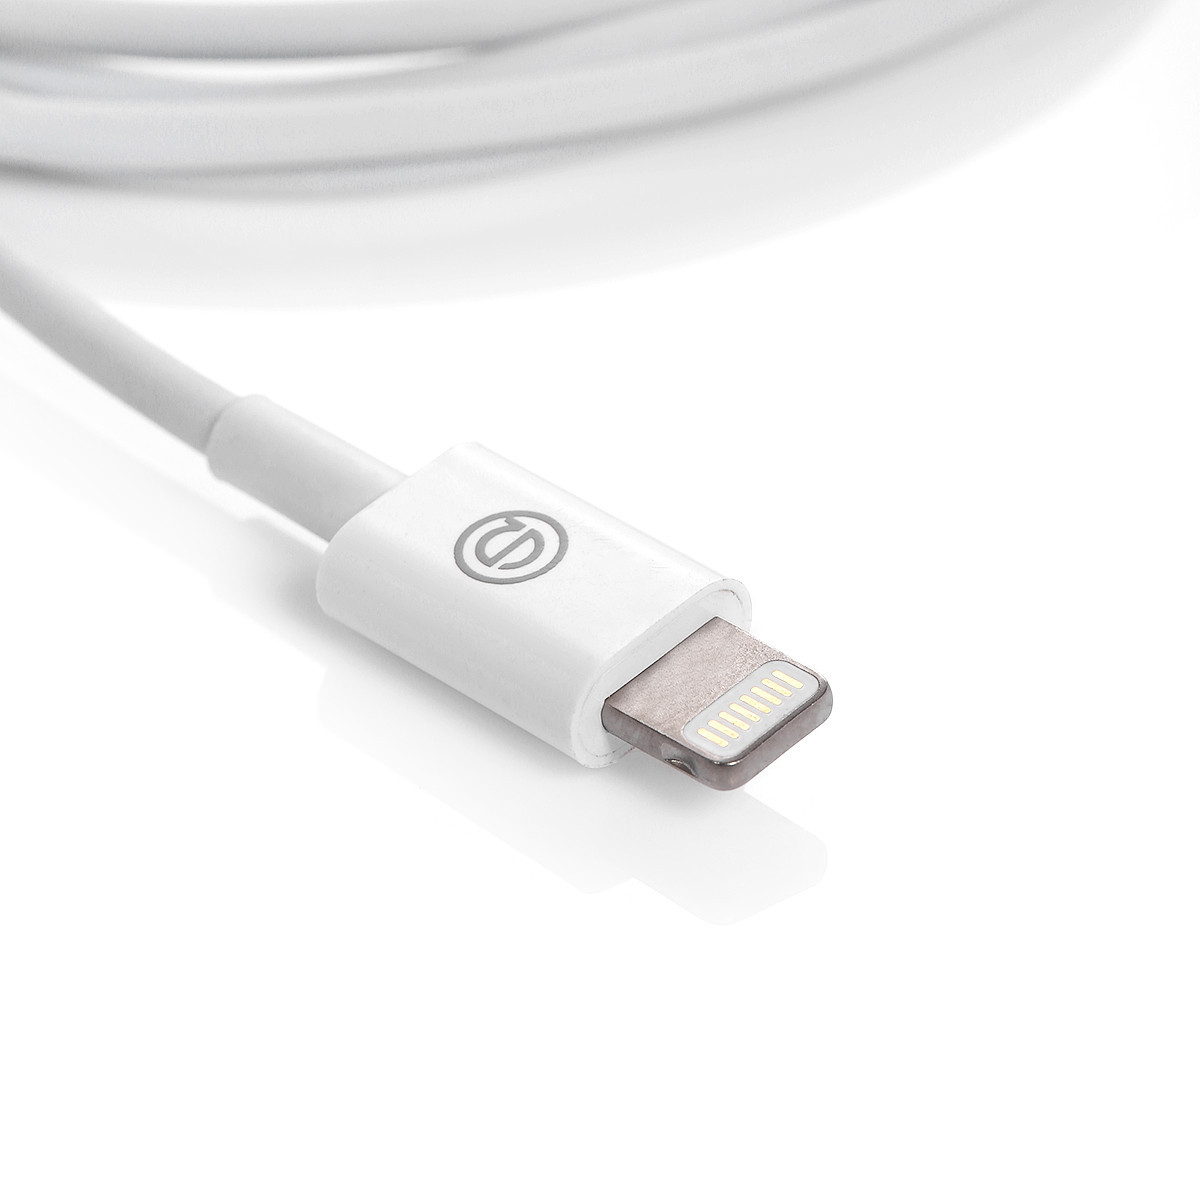 3ft 1m 8 Pin Chuyển USB Data Cable Dây Sync, iPhone USB 2.0 Cable